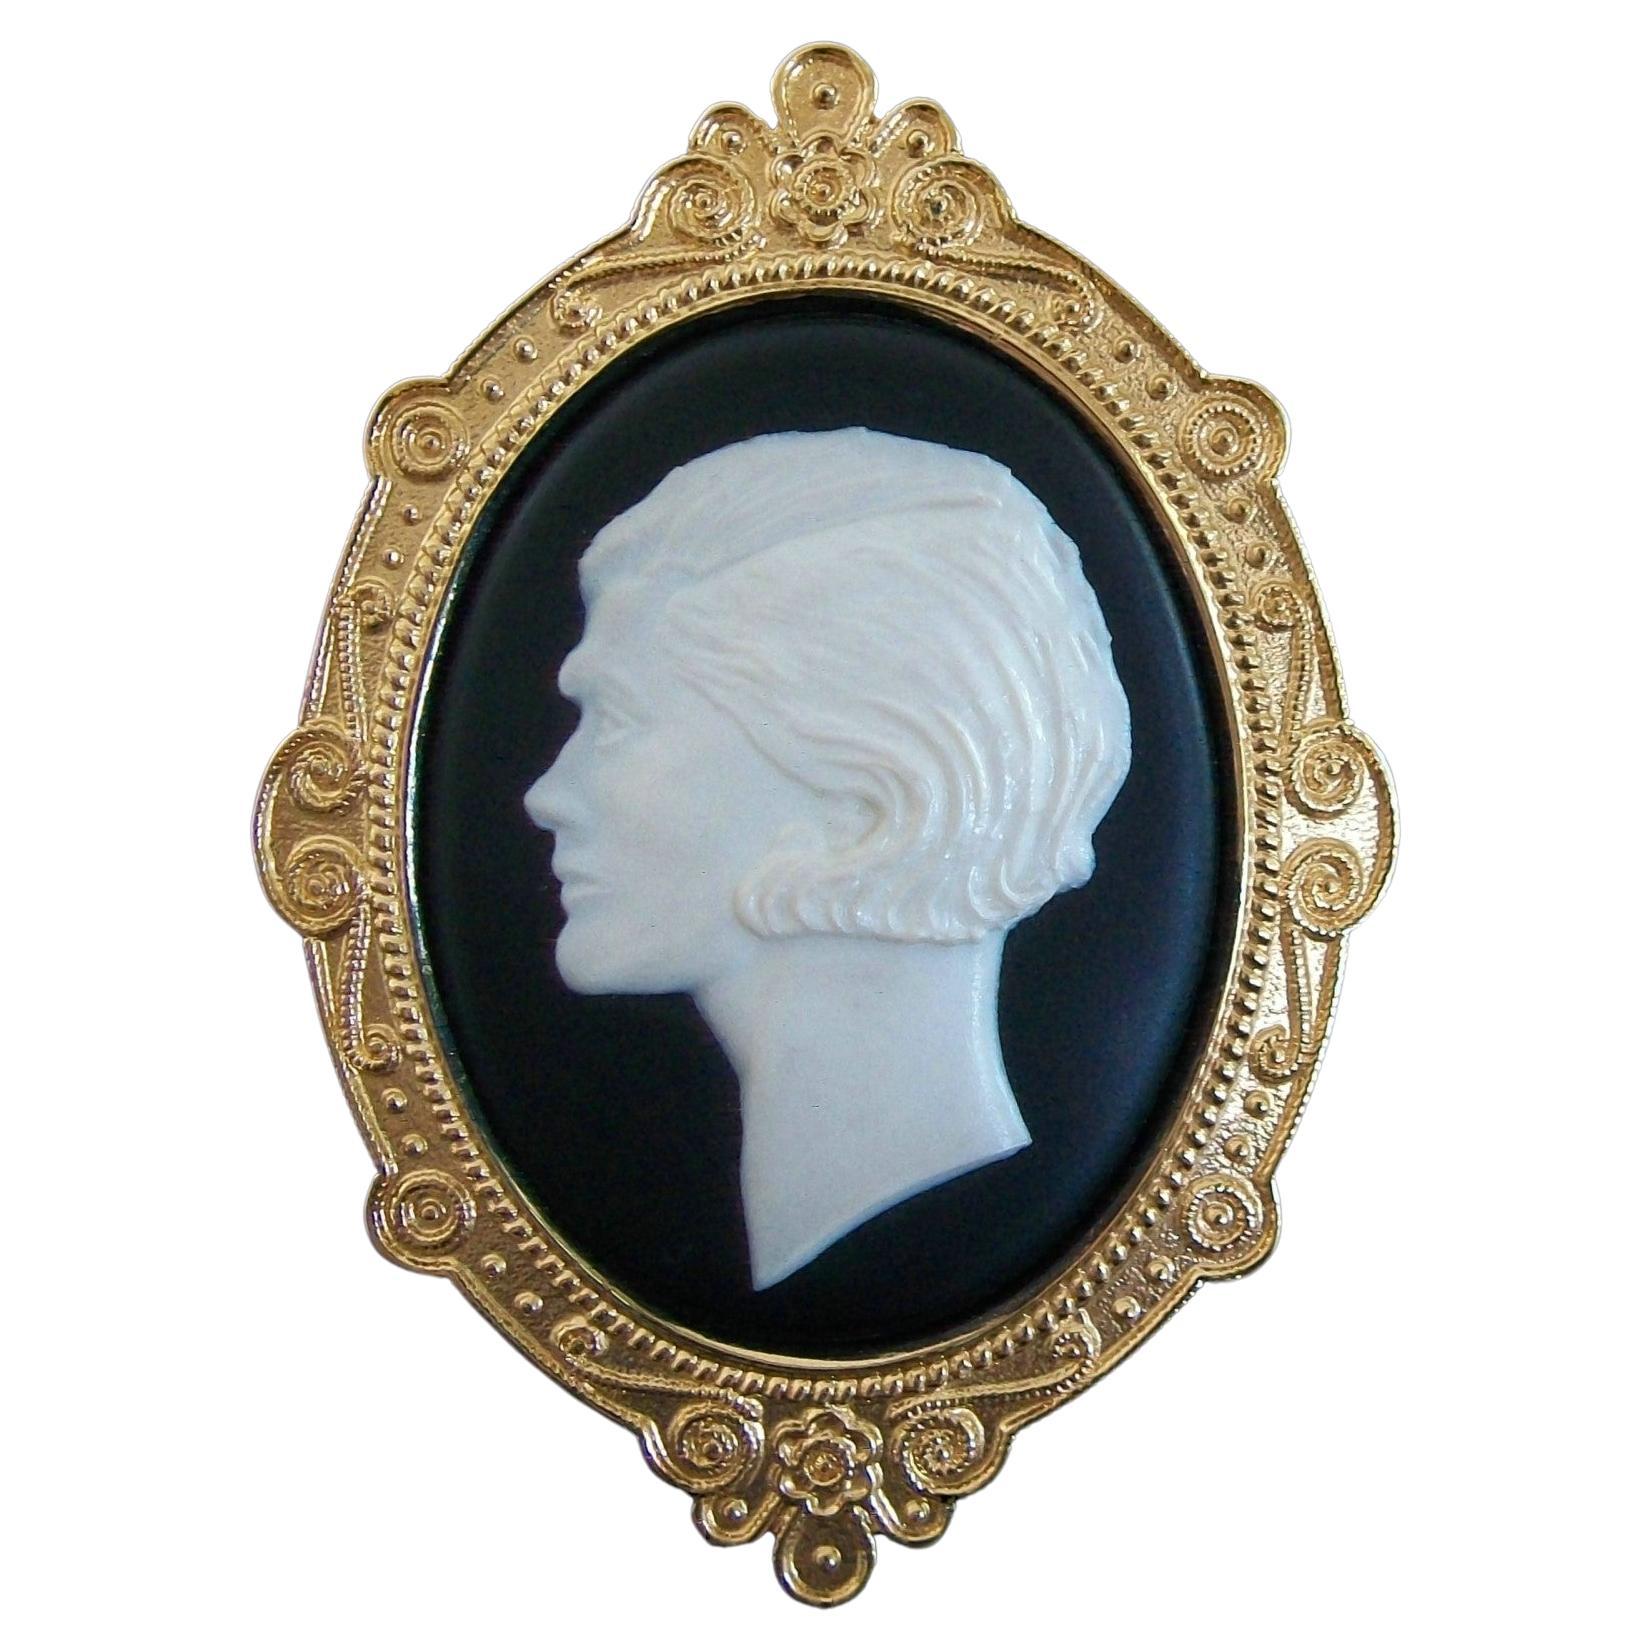 CHANEL - Vintage Over-sized 'Coco' Cameo Brooch - France - Circa 1980's